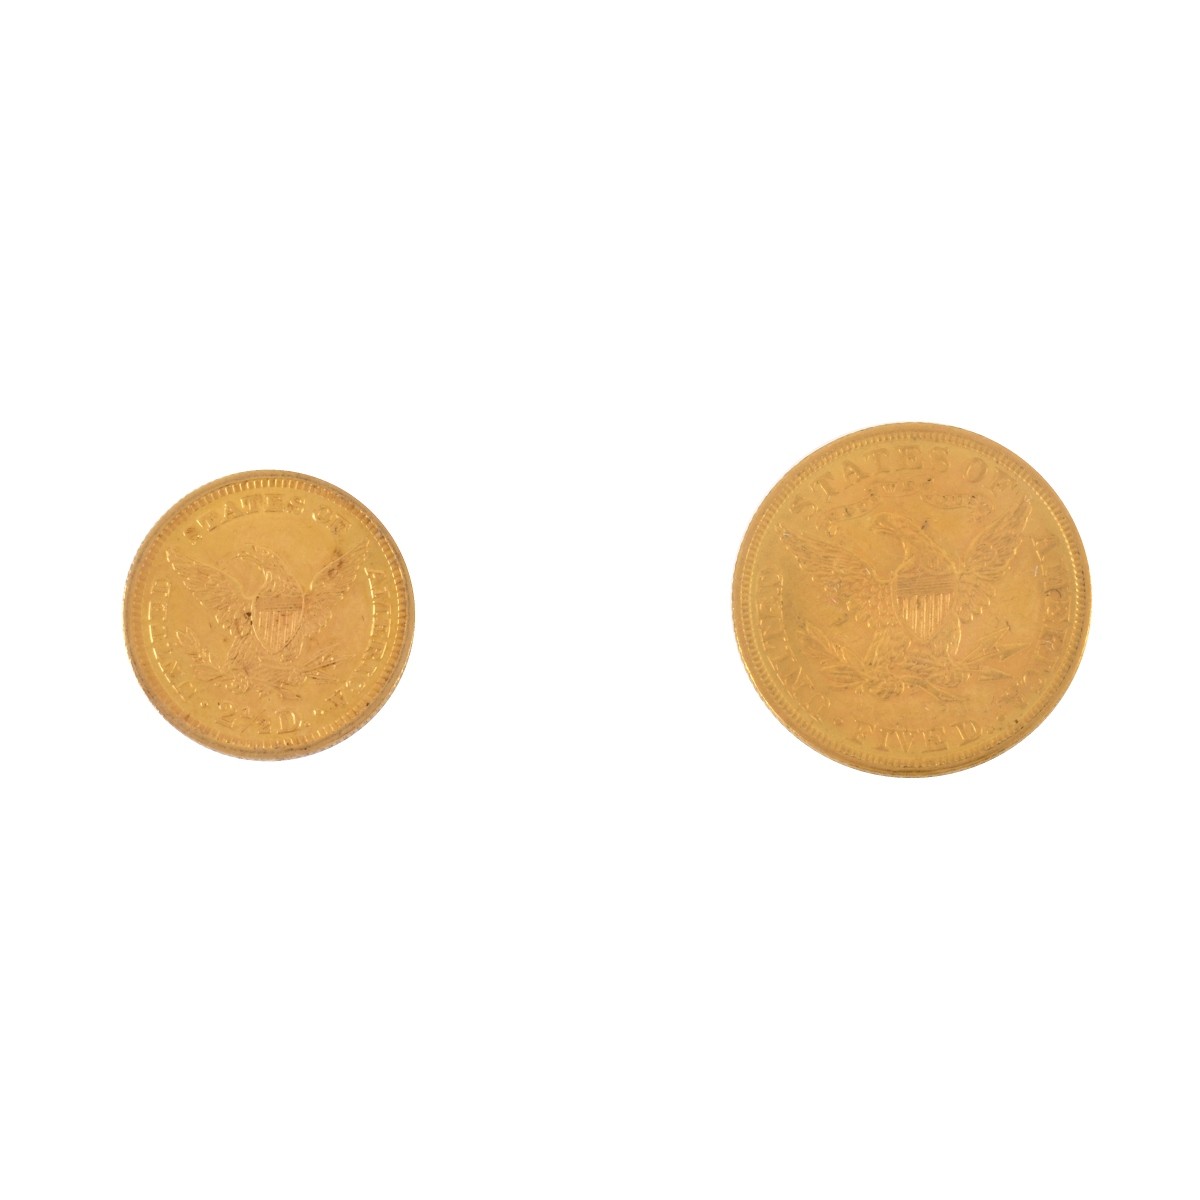 Two US Gold Coins